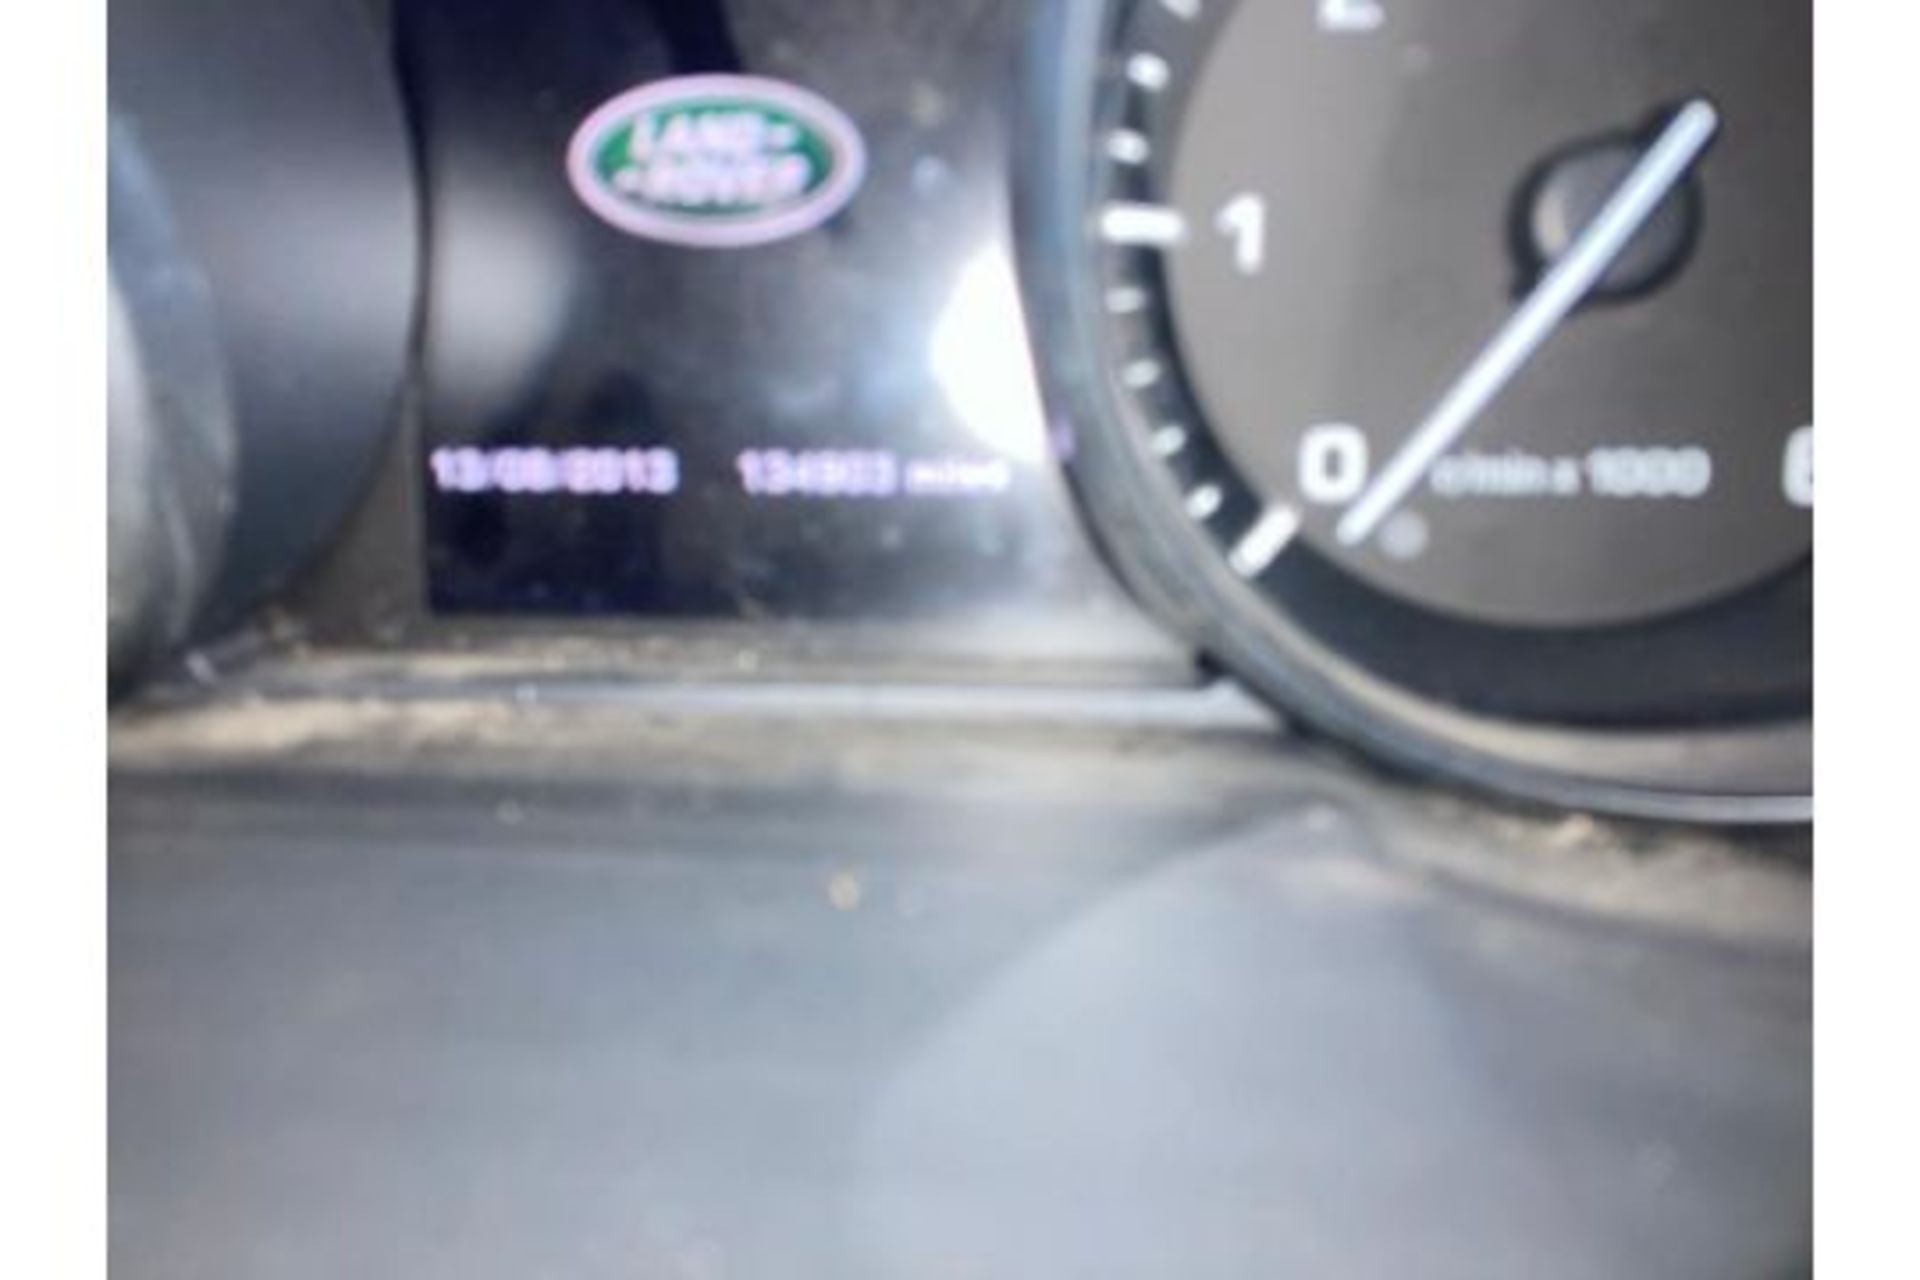 LAND ROVER DISCOVERY SPORT 2.0 TD4 SE TECH 150 S/S  STARTS RUNS AND DRIVES REGISTERED: 18th Nov 2015 - Image 6 of 6